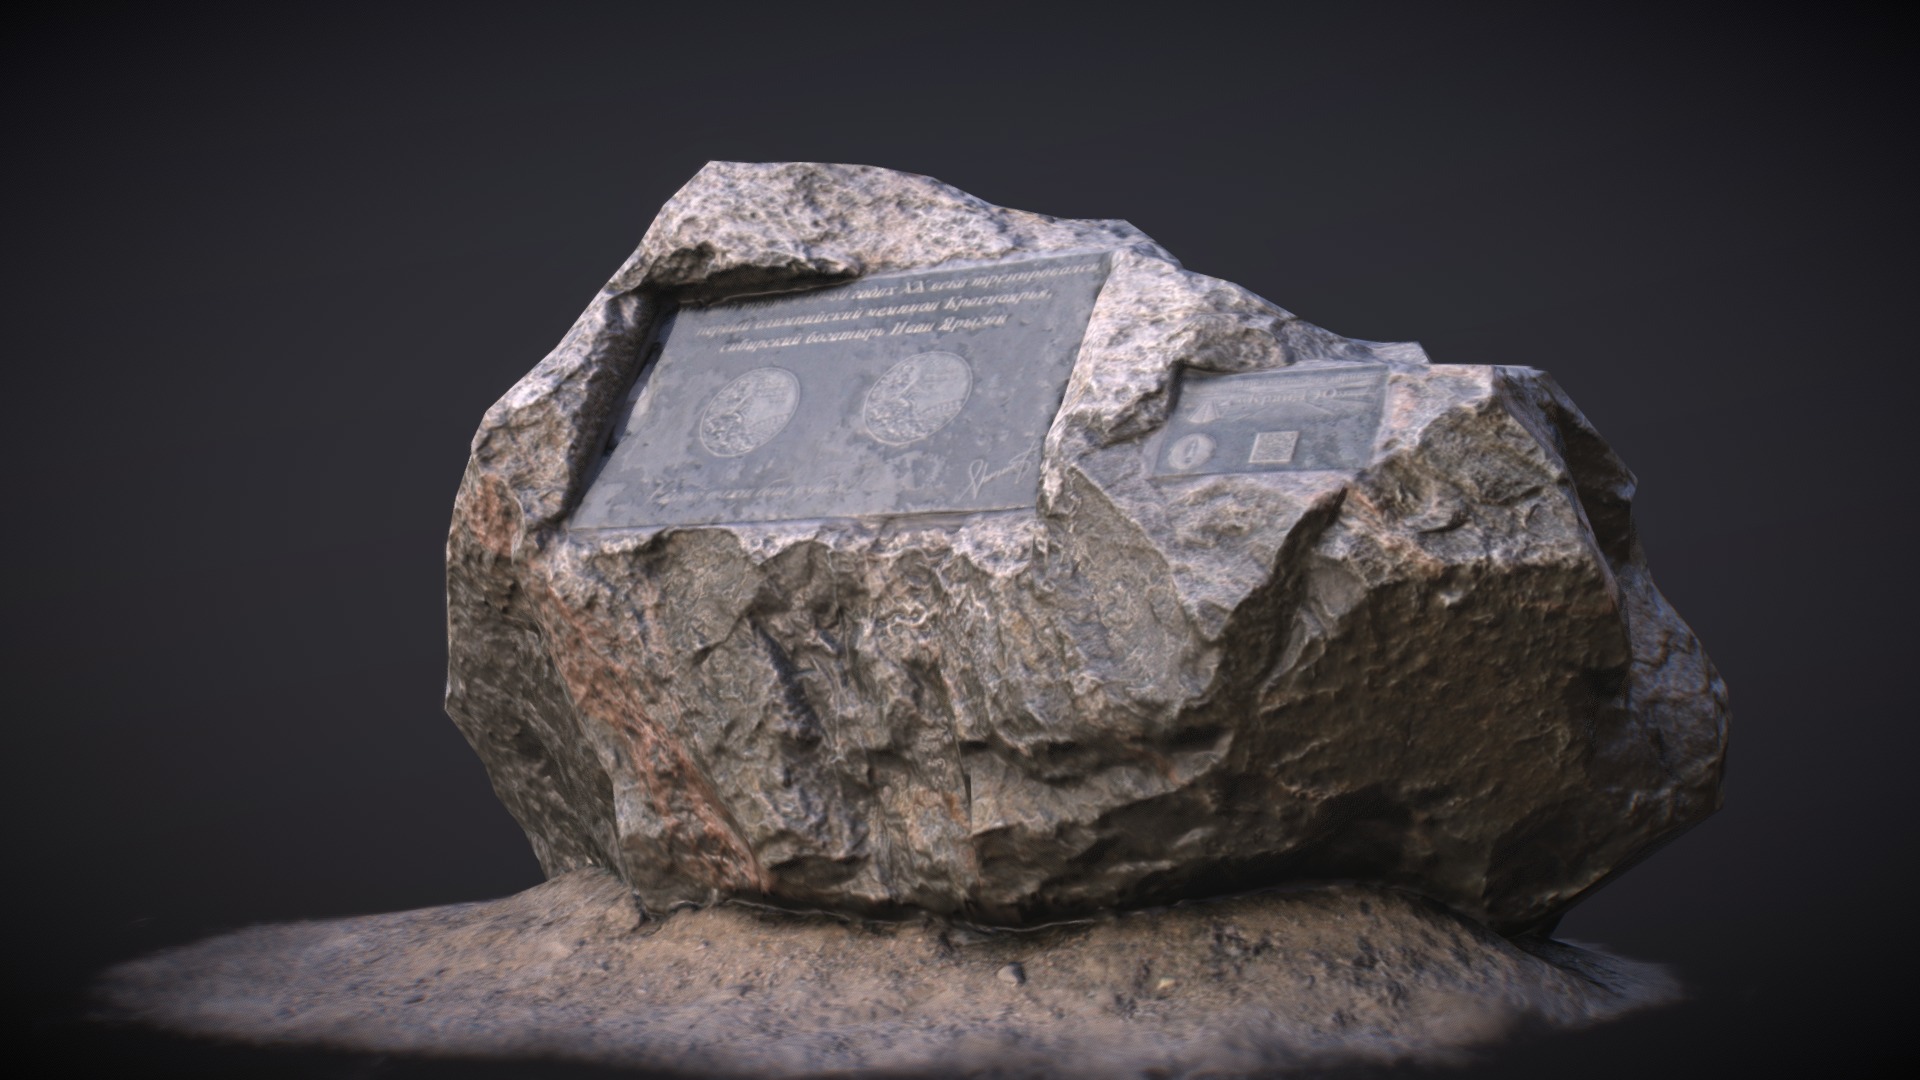 3D model Krasnoyarsk Stone - This is a 3D model of the Krasnoyarsk Stone. The 3D model is about a rock with a carved face.